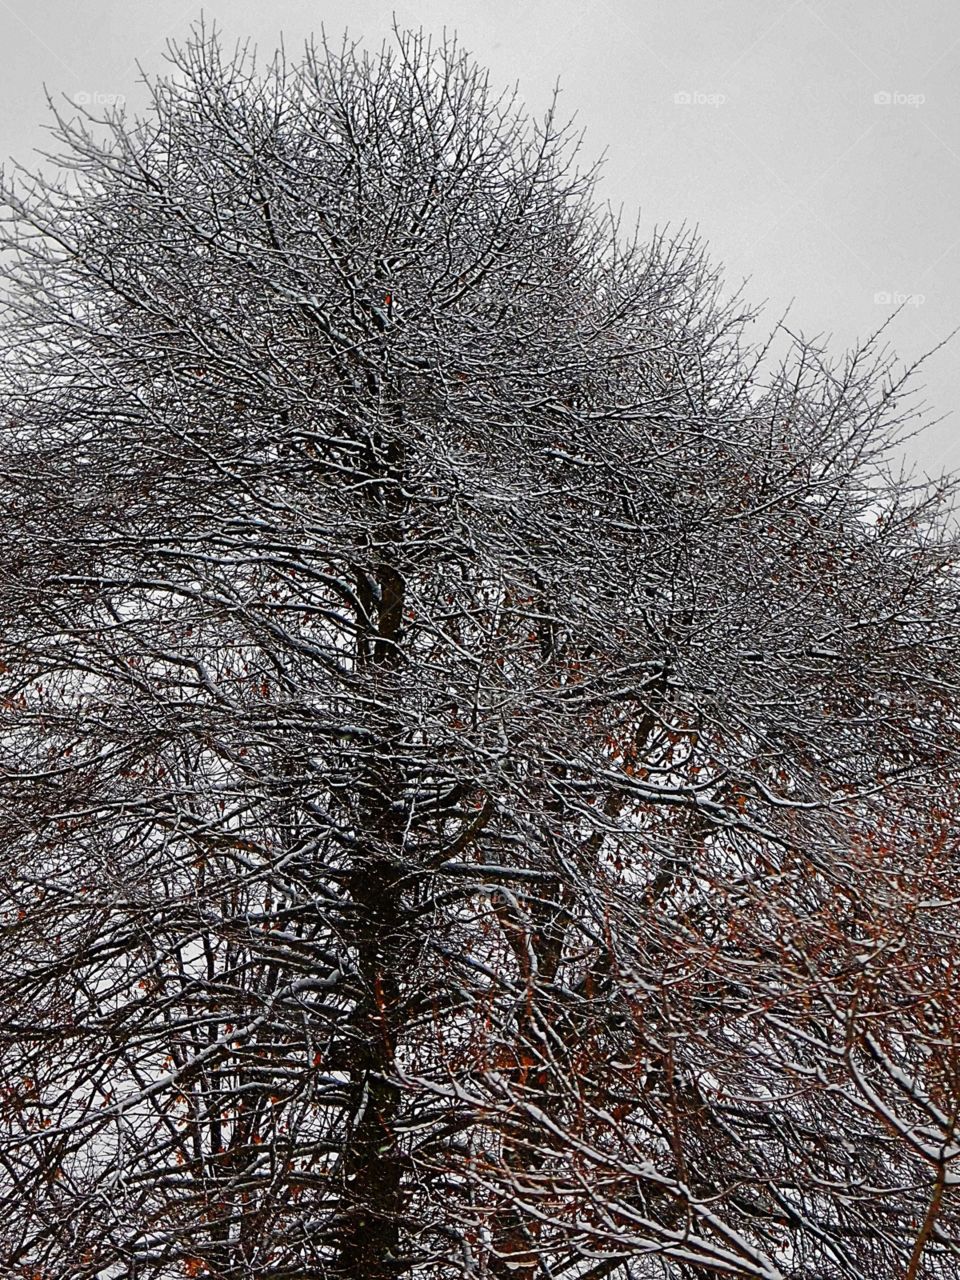 Frosted Branches in and Upward View